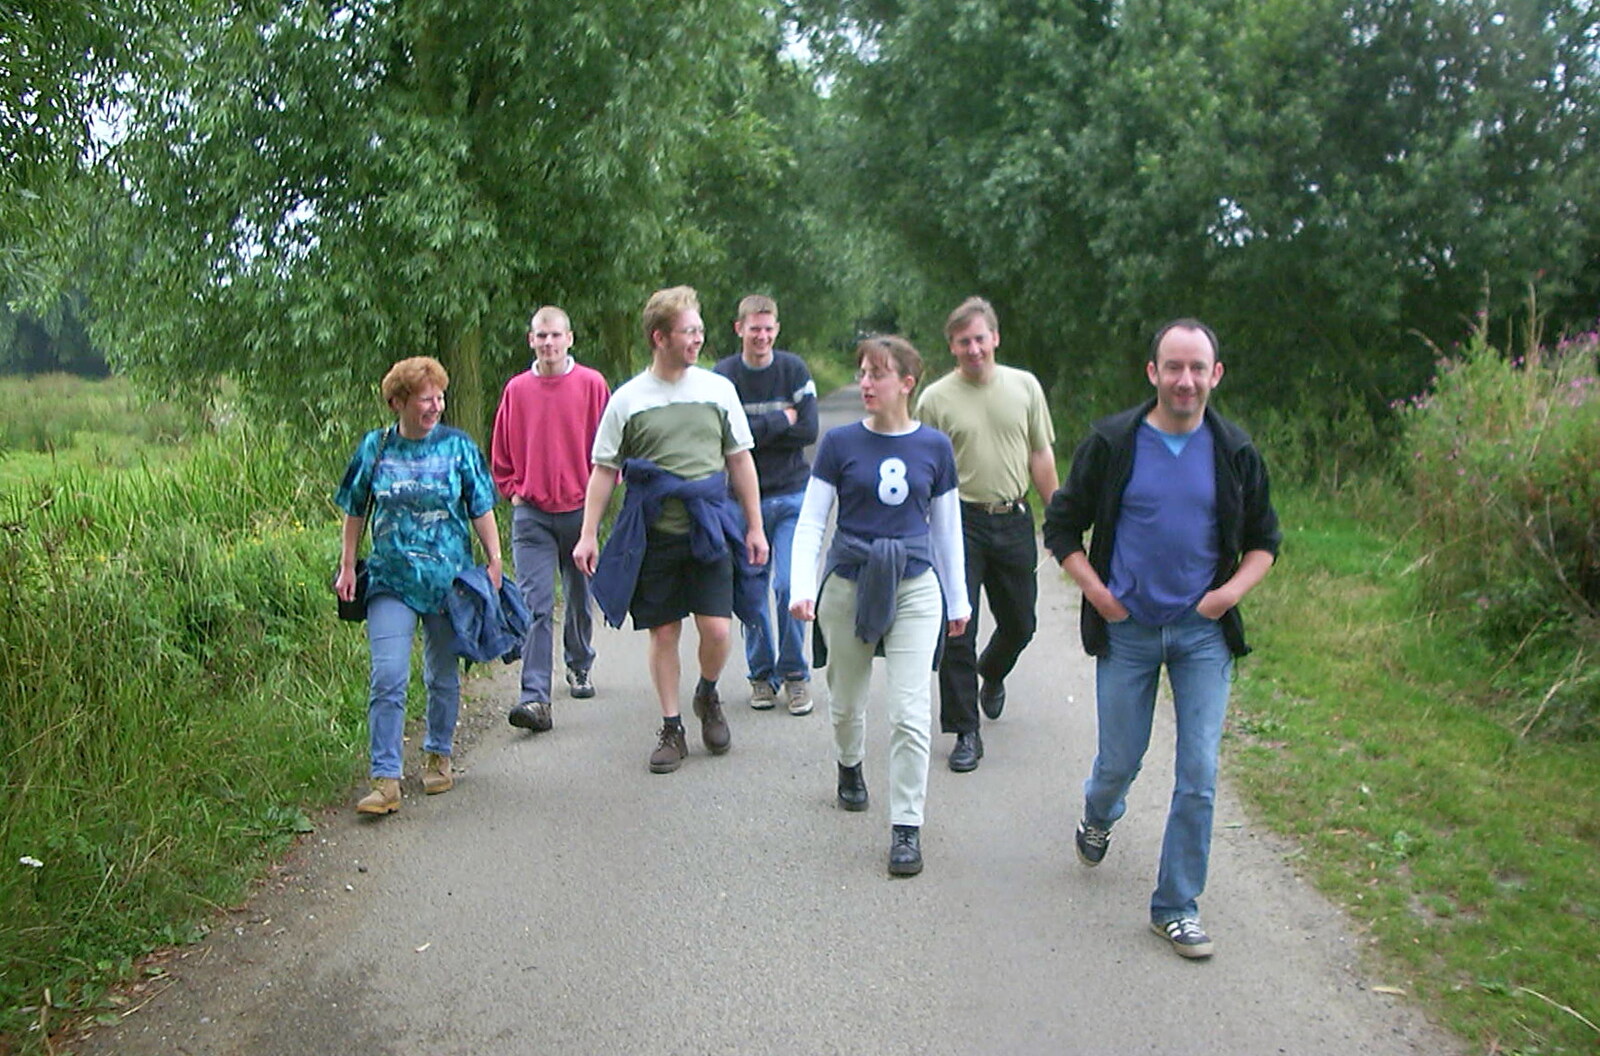 A BSCC Splinter Group Camping Weekend, Theberton, Suffolk - 11th August 2002: Marching about